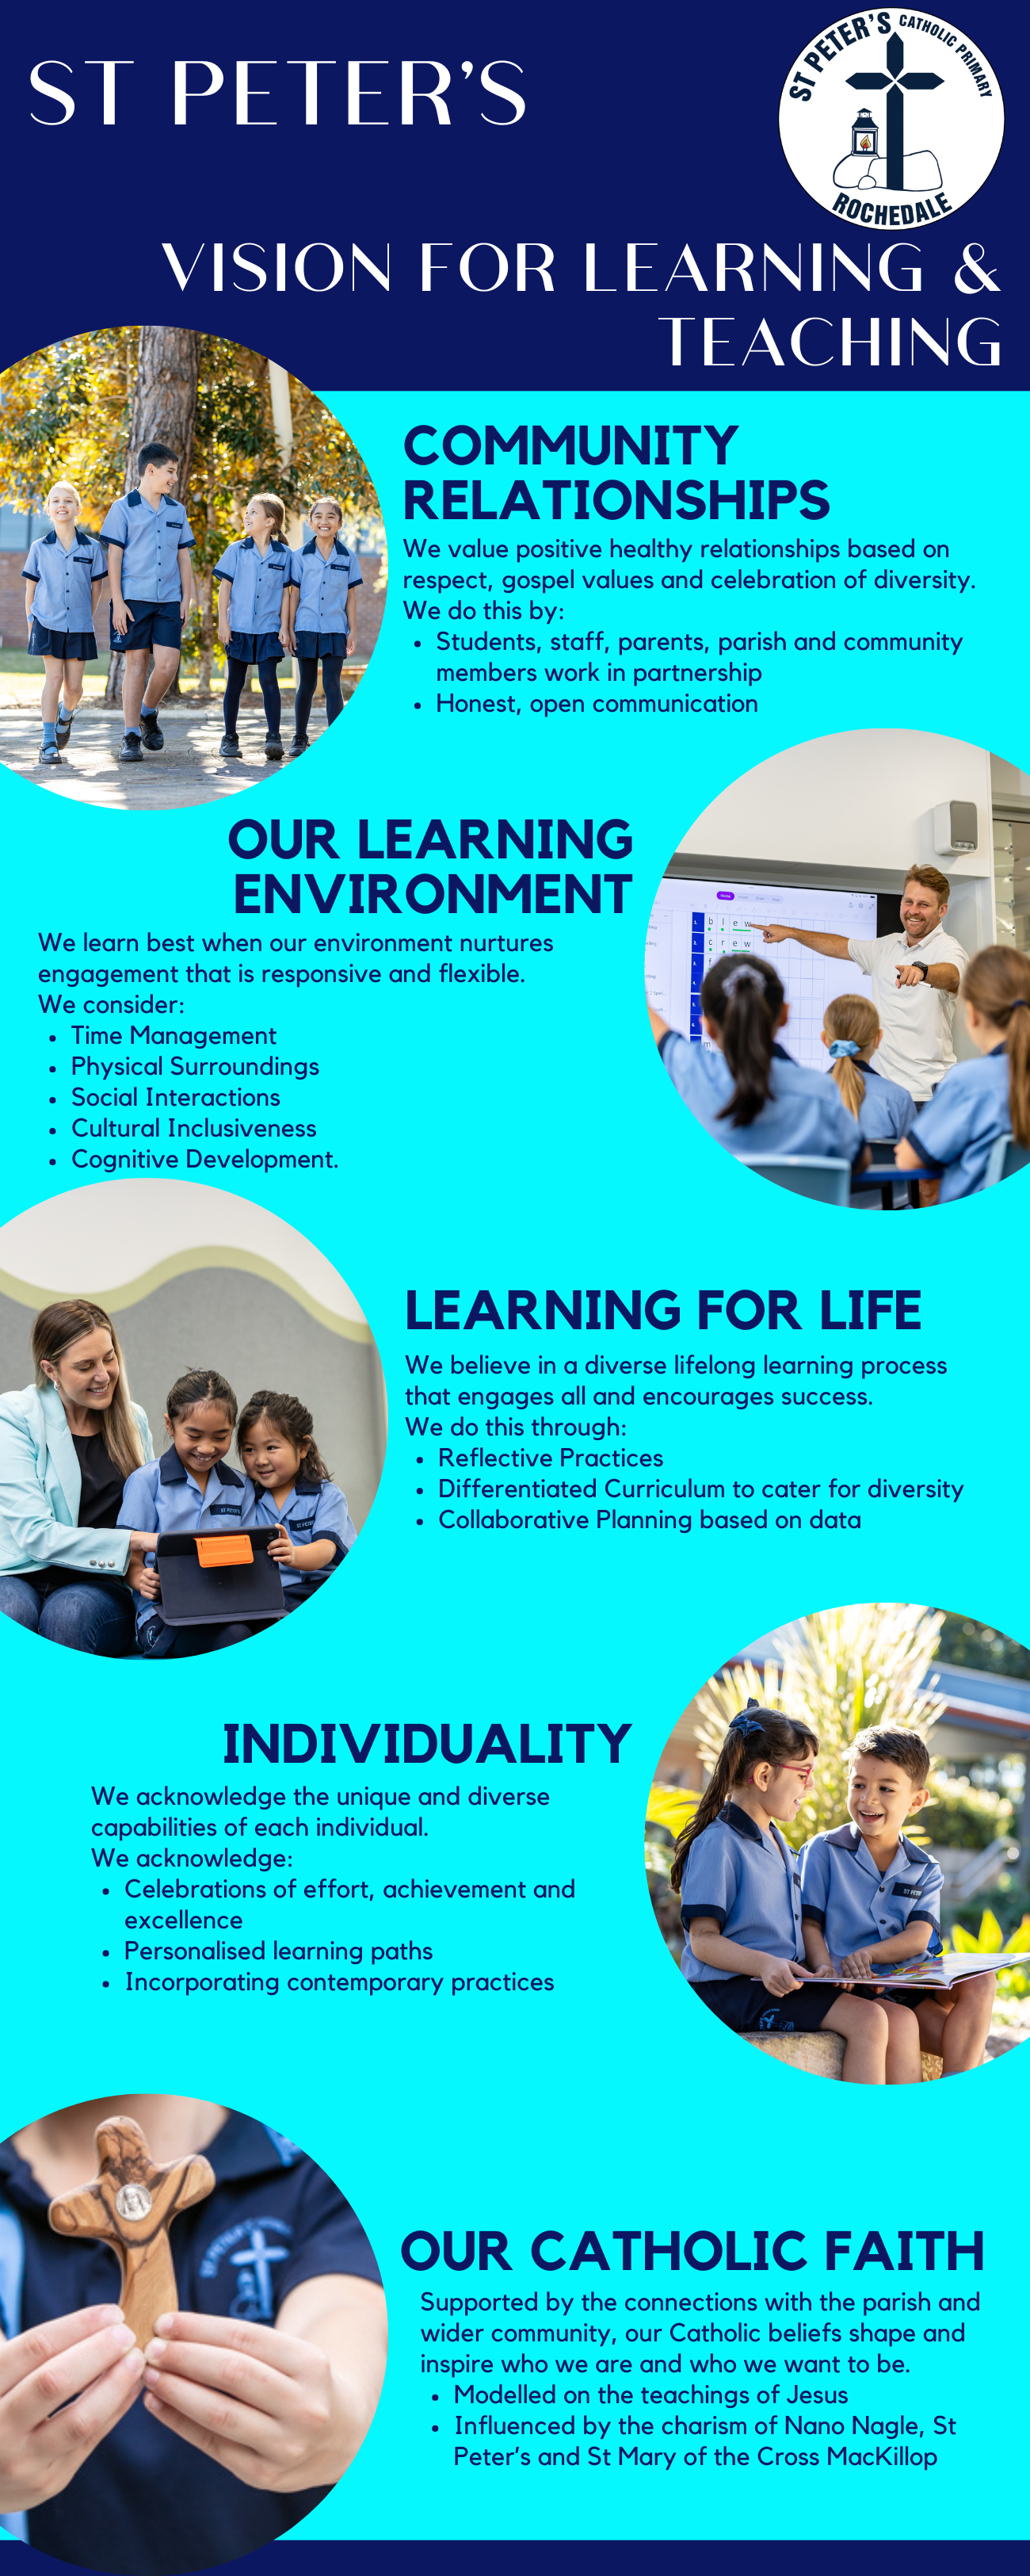 St Peter's Vision for Learning & Teaching.png